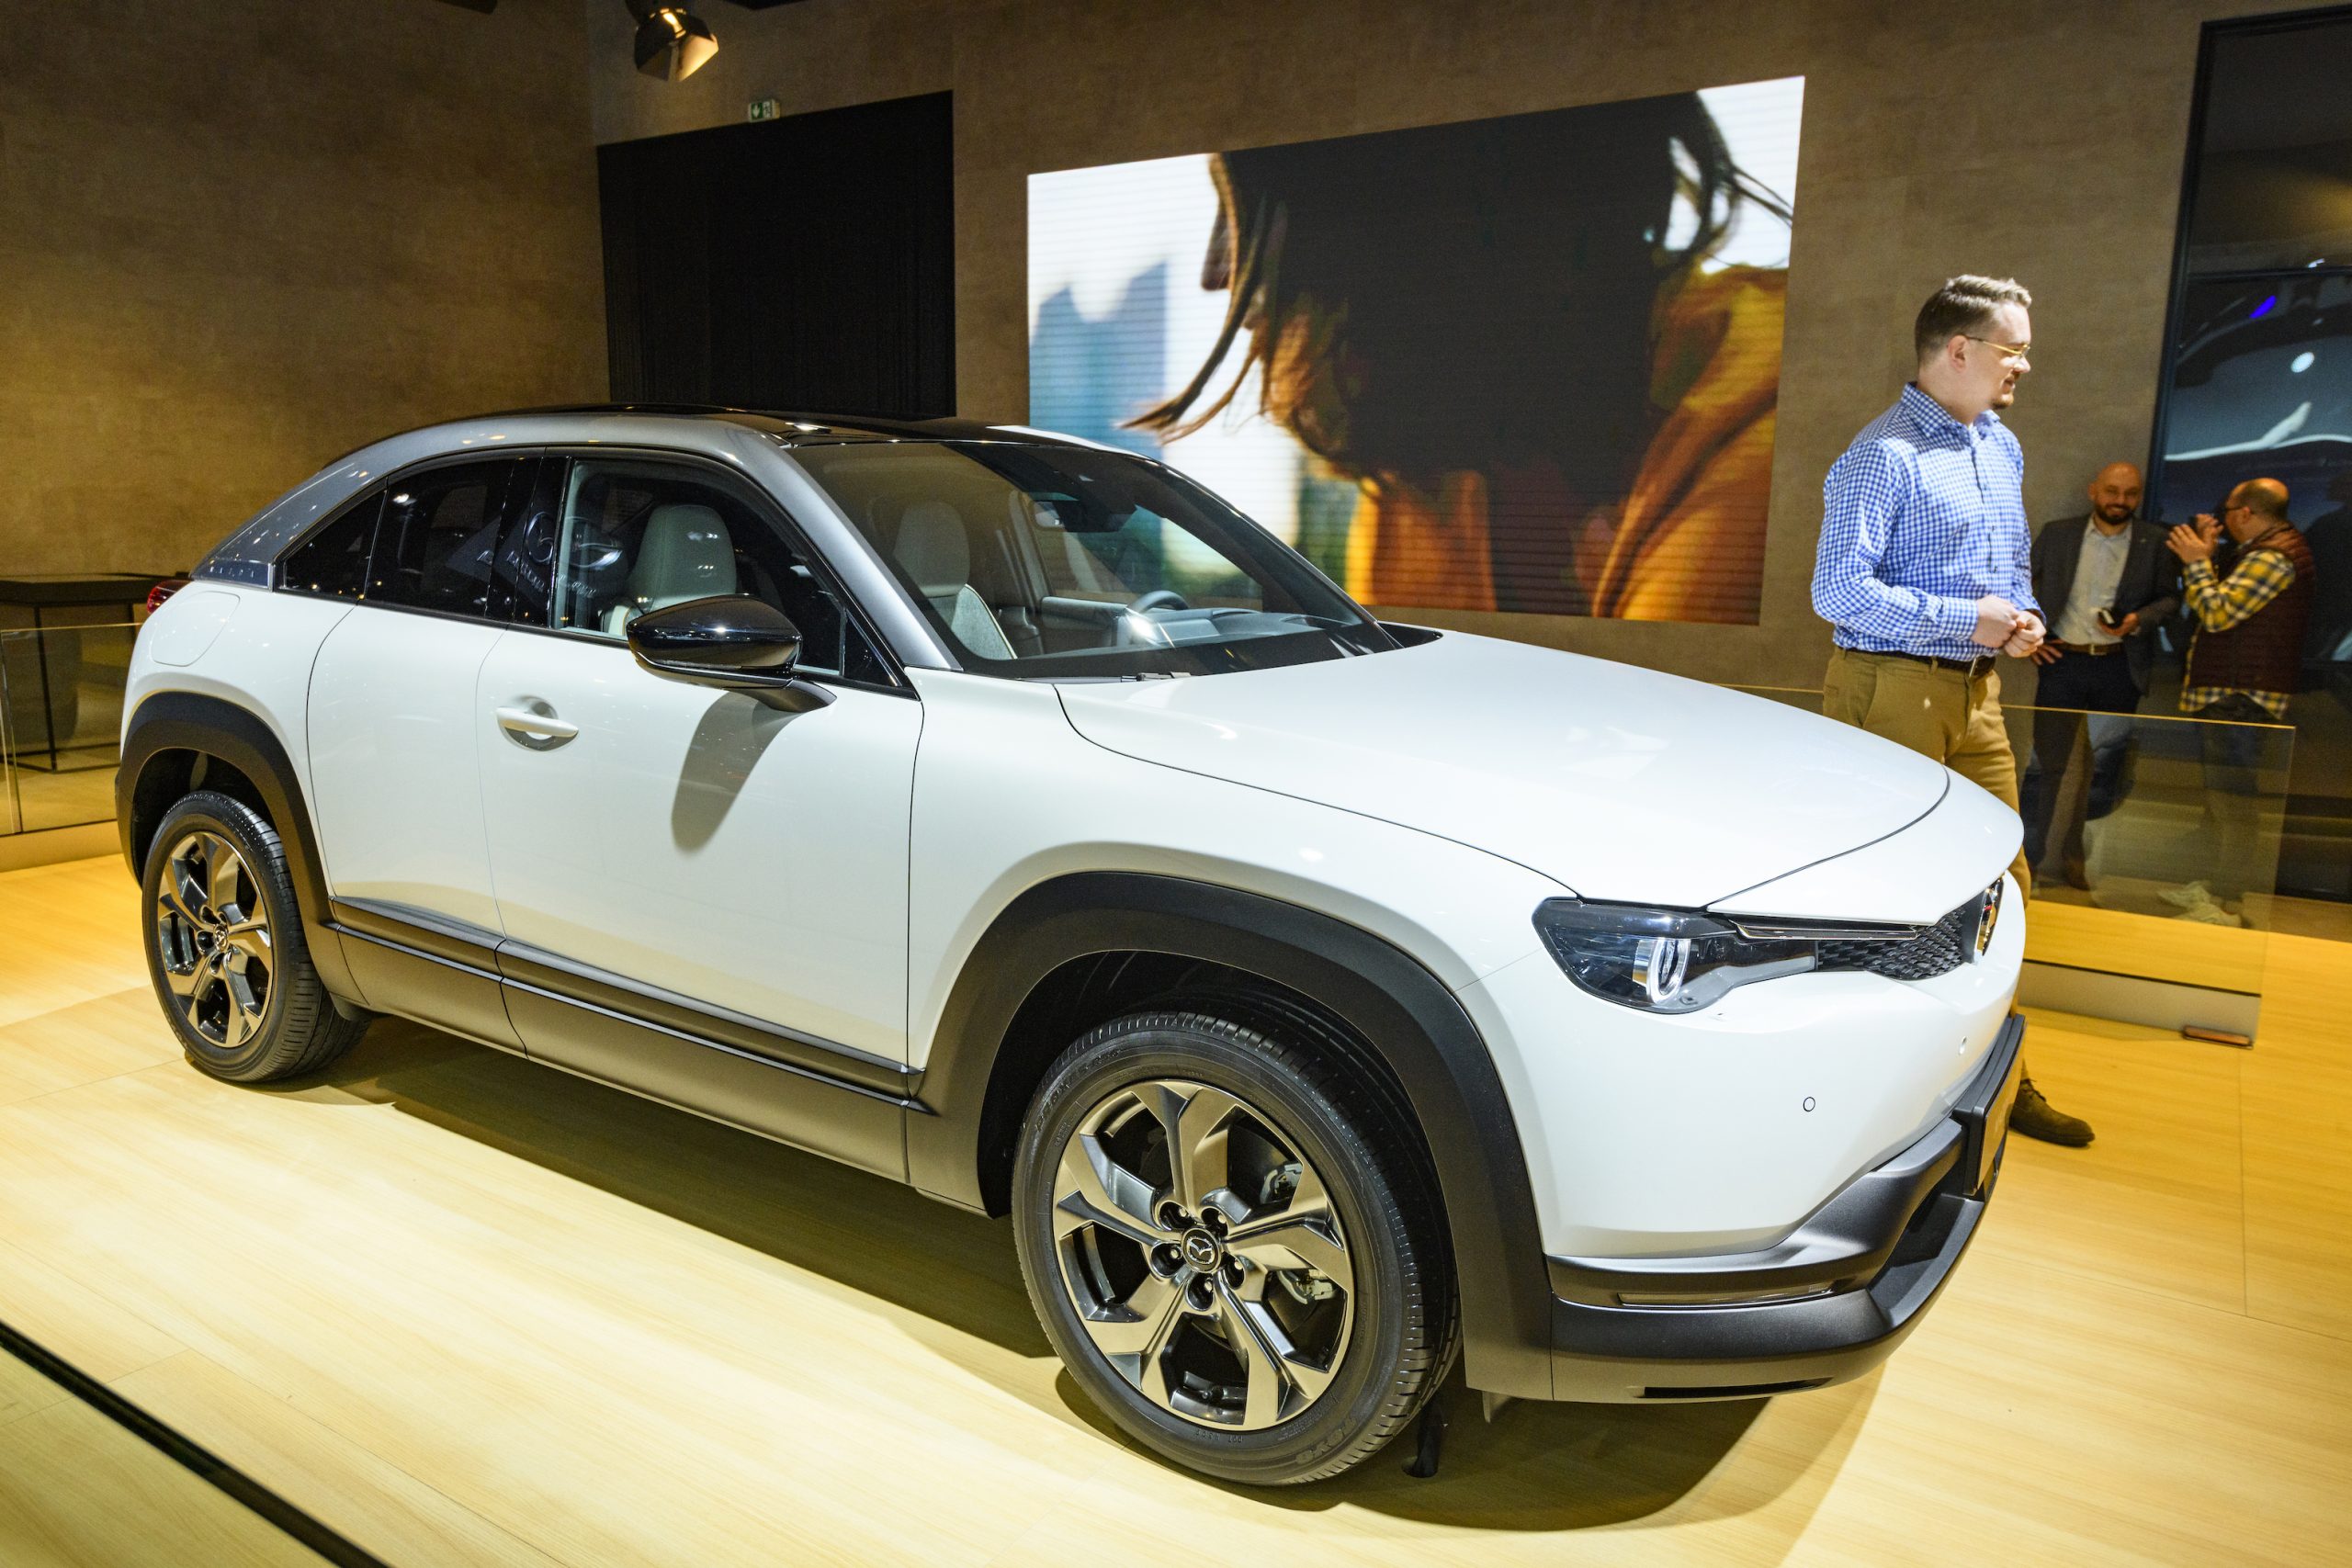 Mazda MX-30 electric compact crossover SUV on display at Brussels Expo